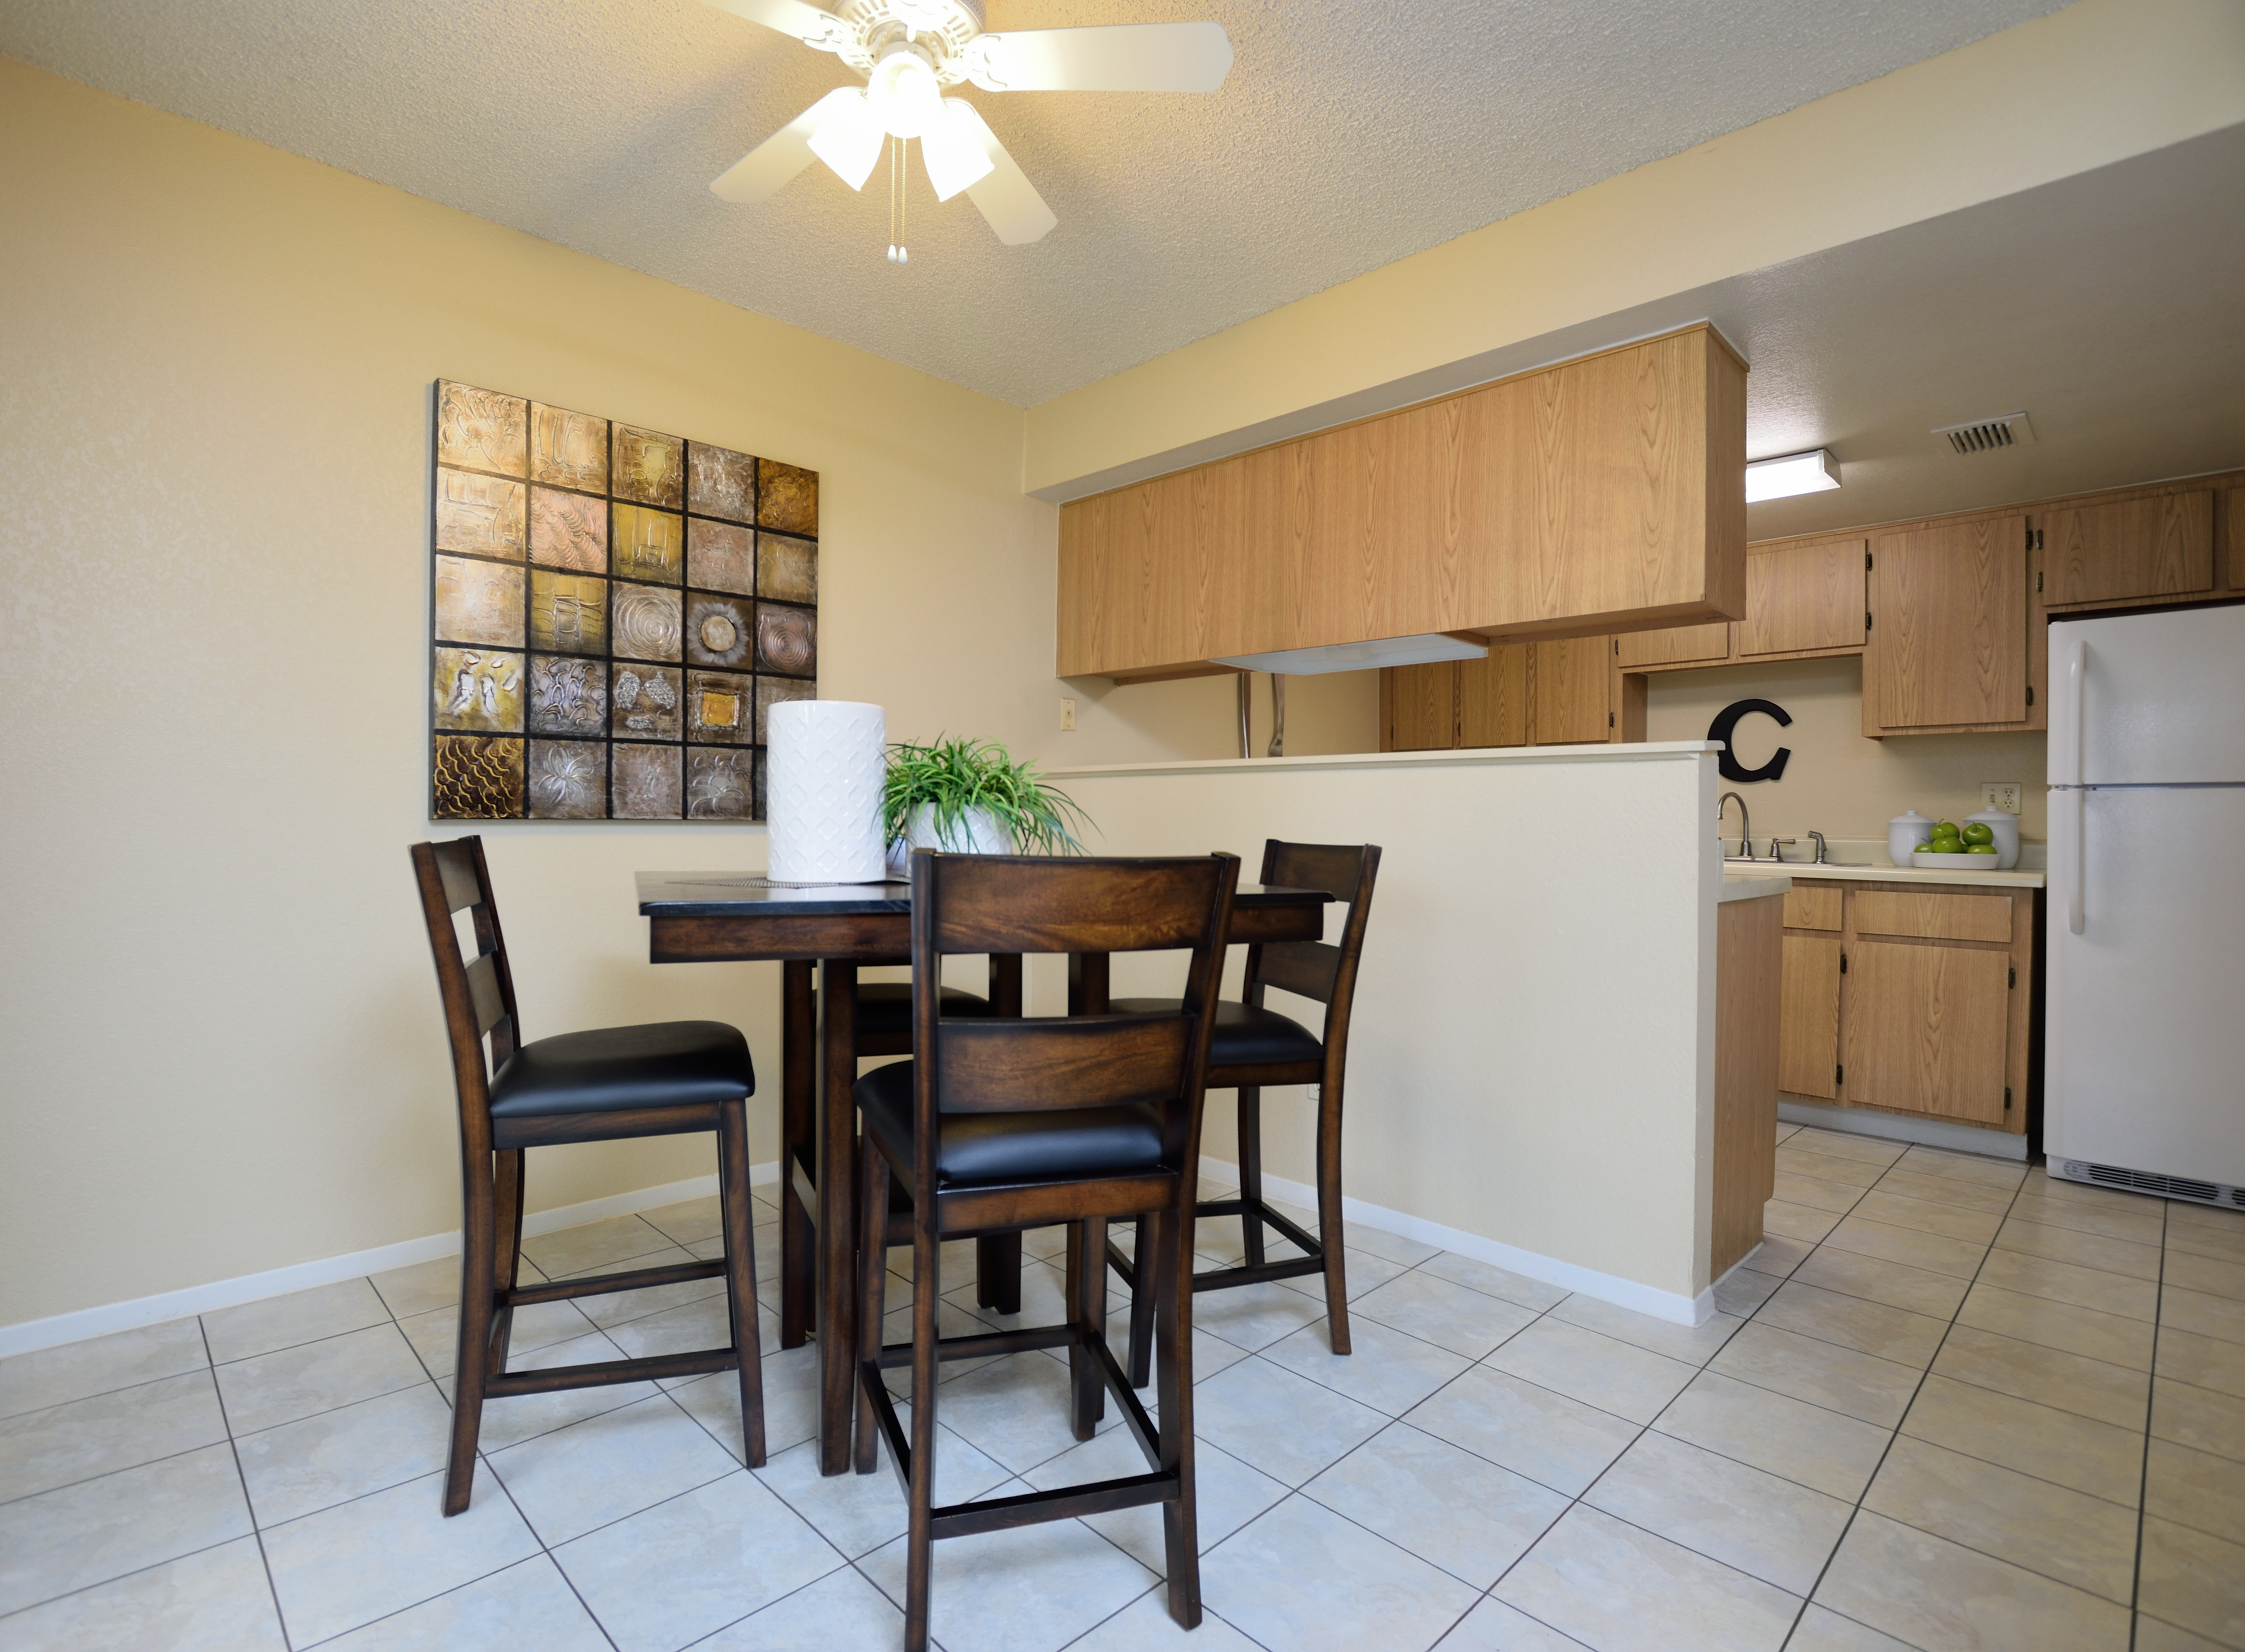 View of Dining Room, Showing Table and Chairs, Ceiling Fan, and Tile Flooring at Camelot Apartments